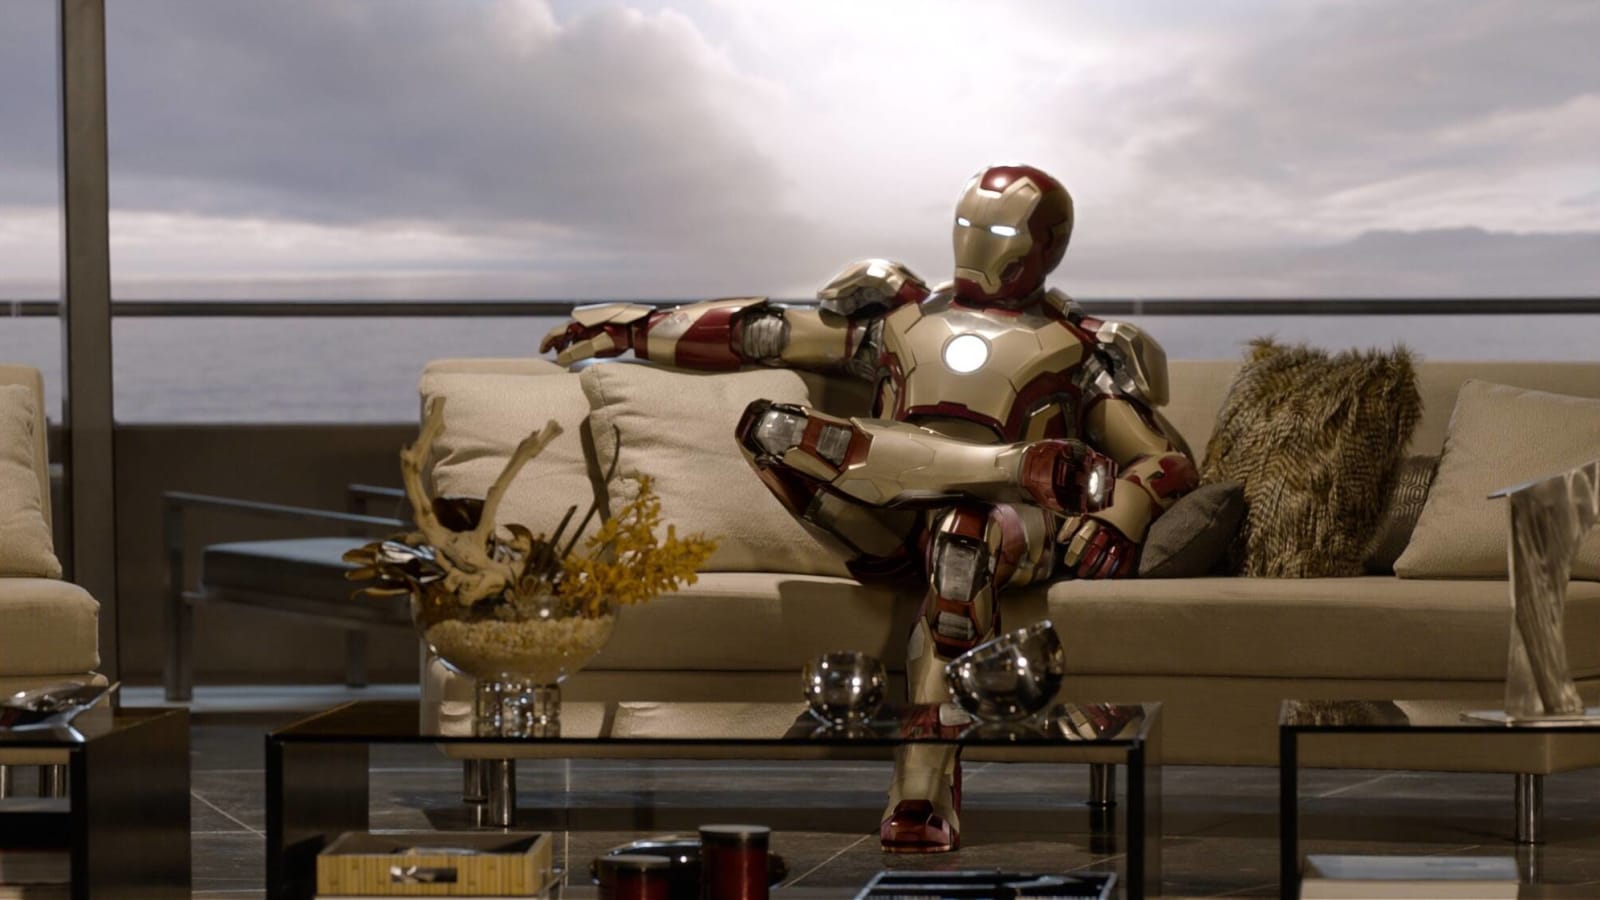 20 facts you might not know about 'Iron Man 3'